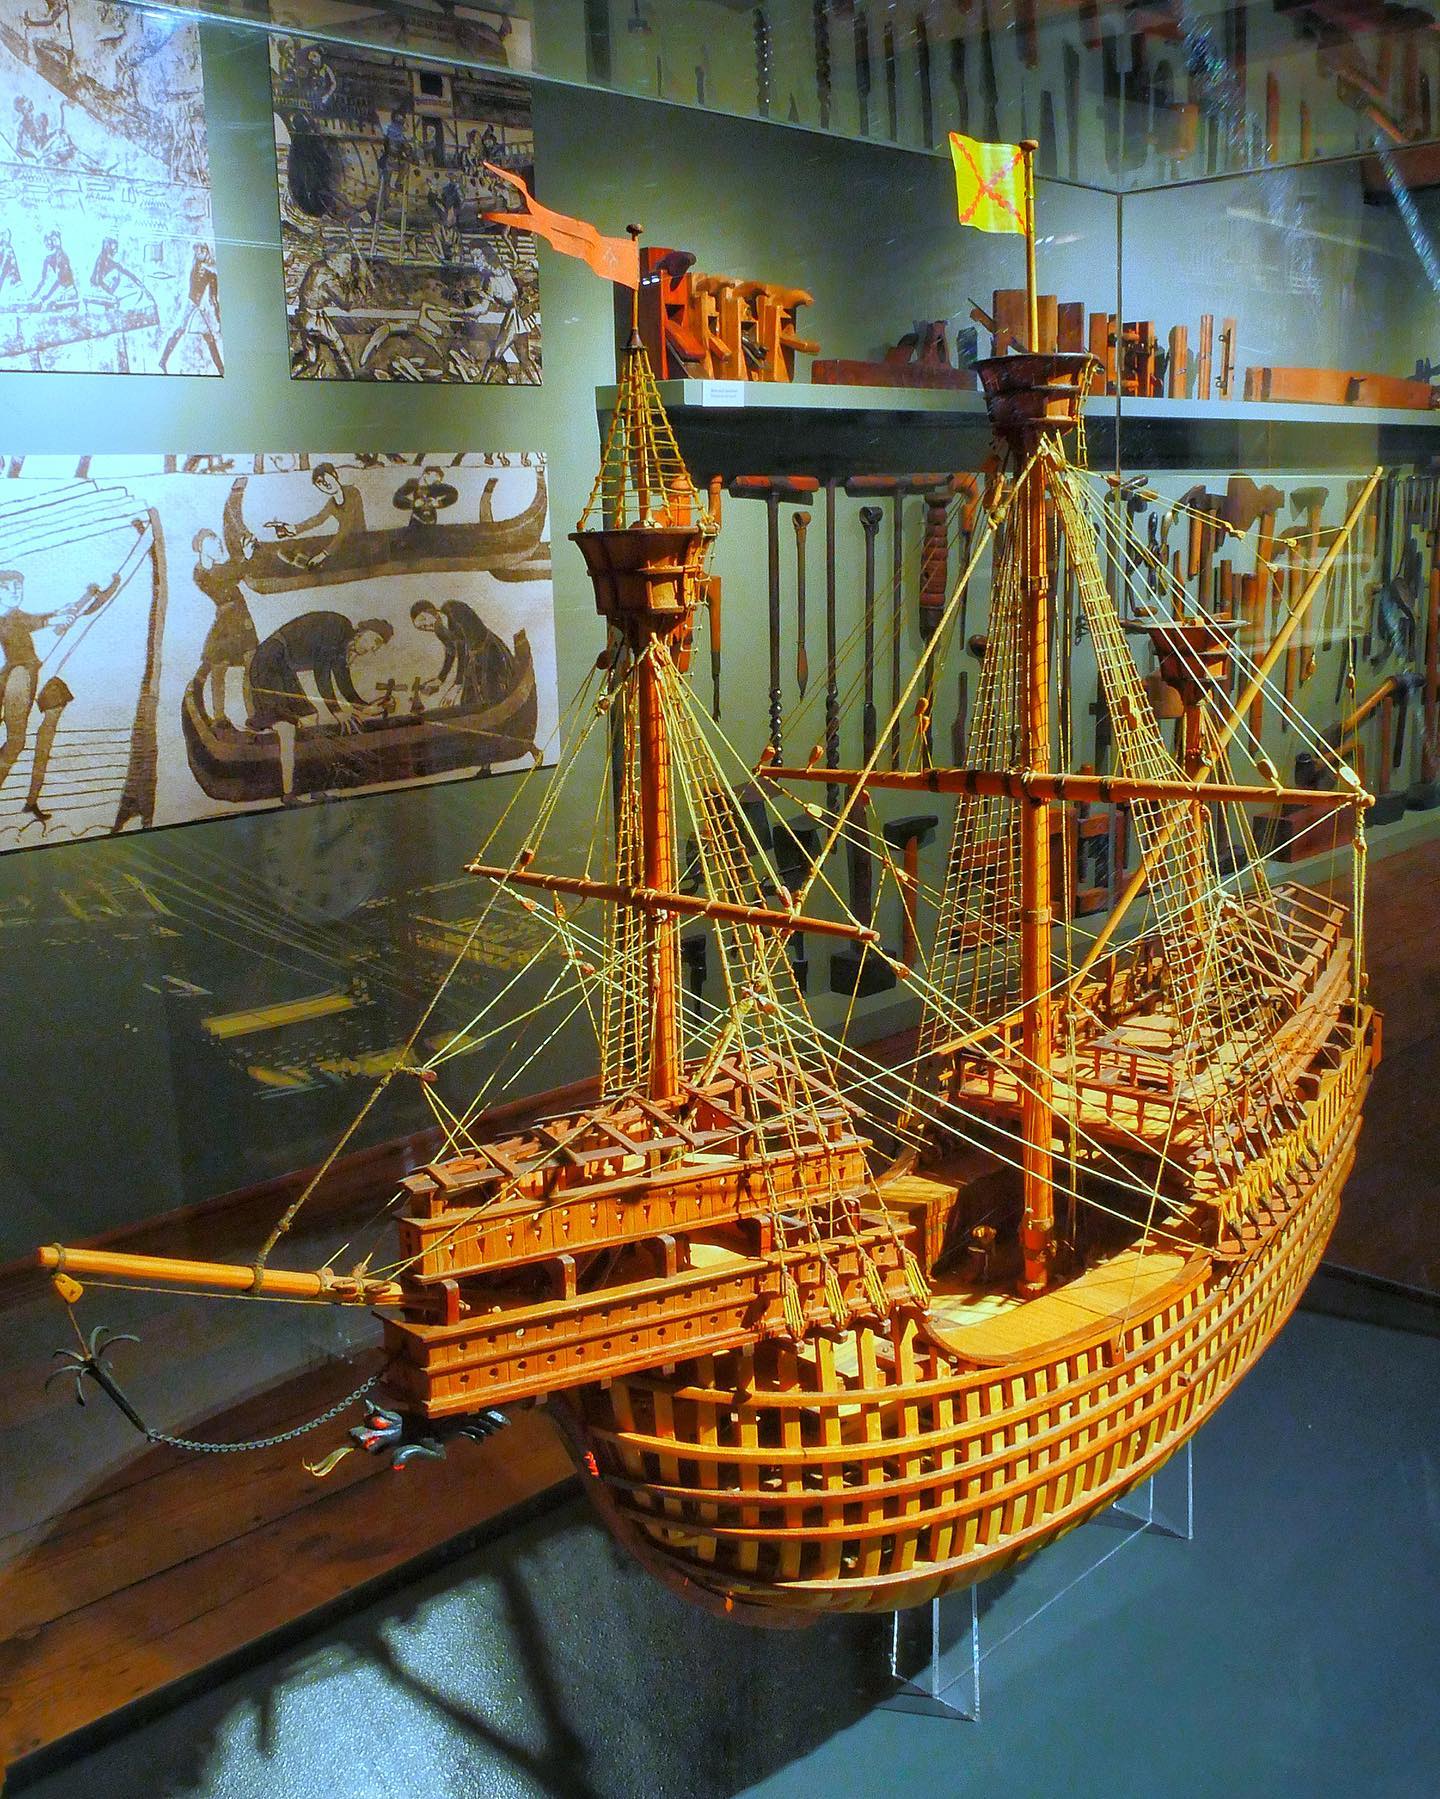 Carrack. This magnificent model of a carrack in an approximate scale of 1:50 is the work of Martin Koschwitz. The model was made using a 1468 woodcut attributed to the Flemish goldsmith Willem A. Cruce as building plans. It stands in our exhibition on the history of shipbuilding, which takes on the whole of deck 3 of the museum.